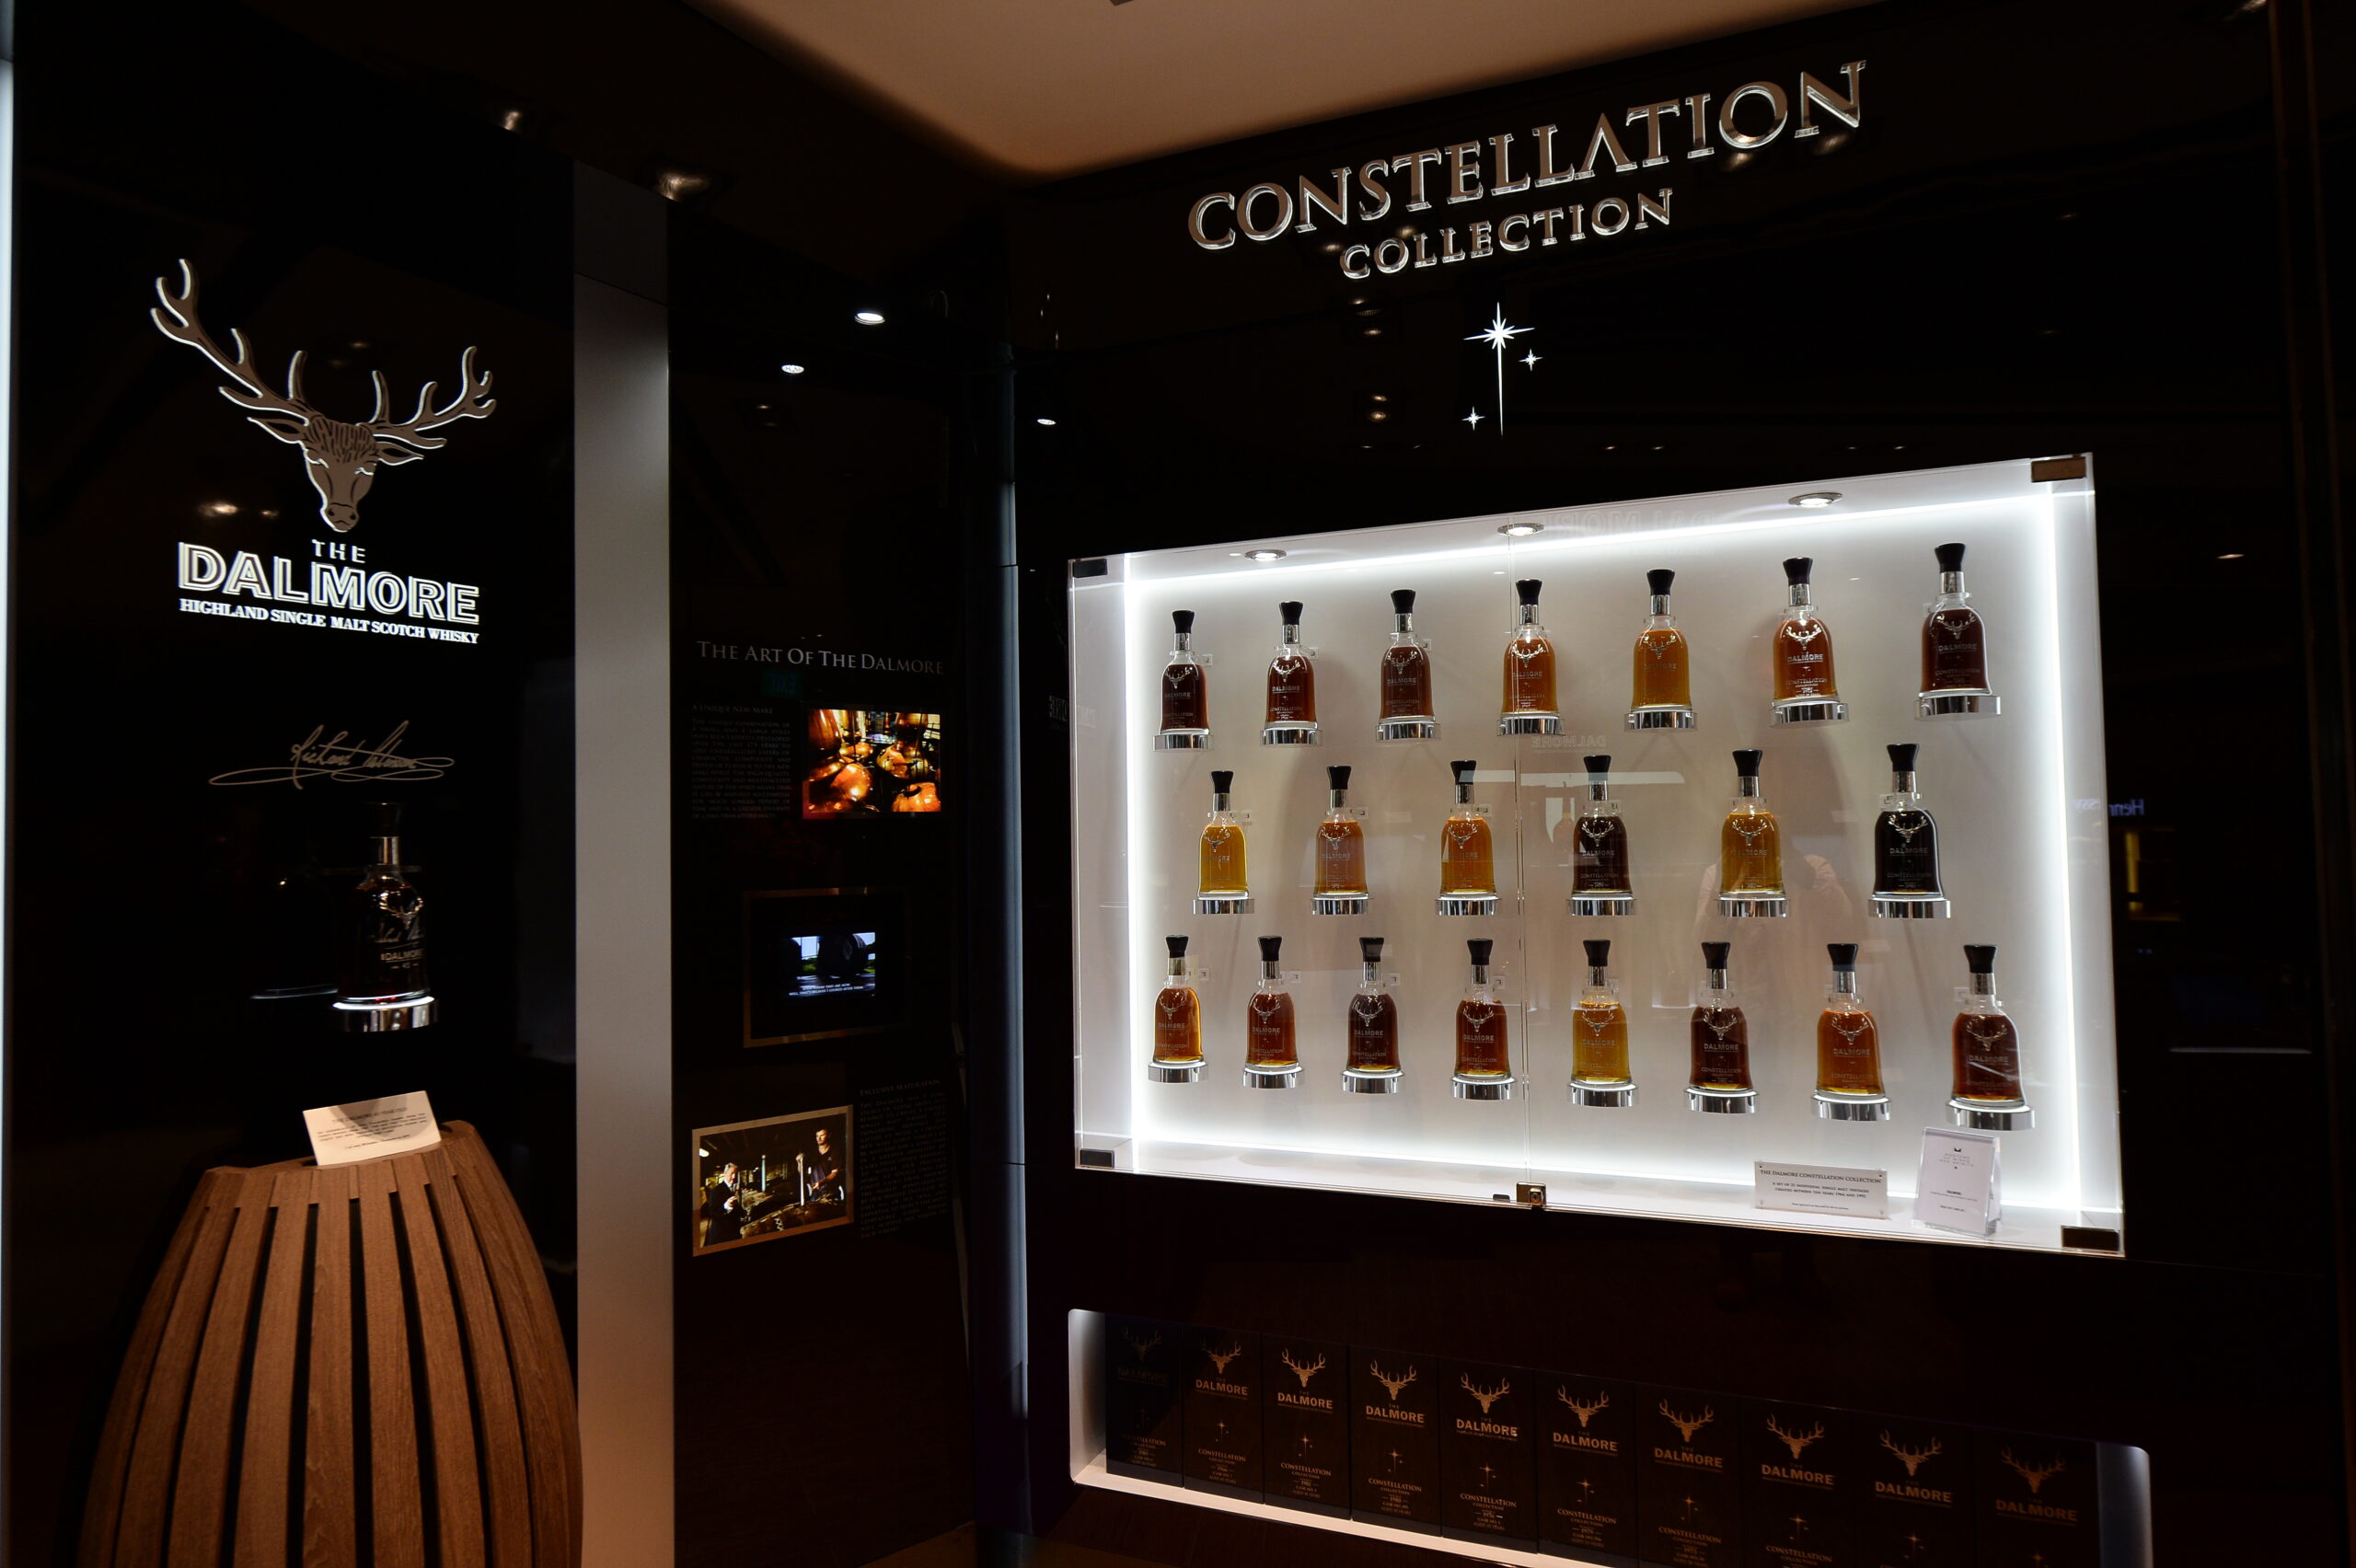 The Dalmore - The Constellation Collection of 21 bottles (worth S$437,490)